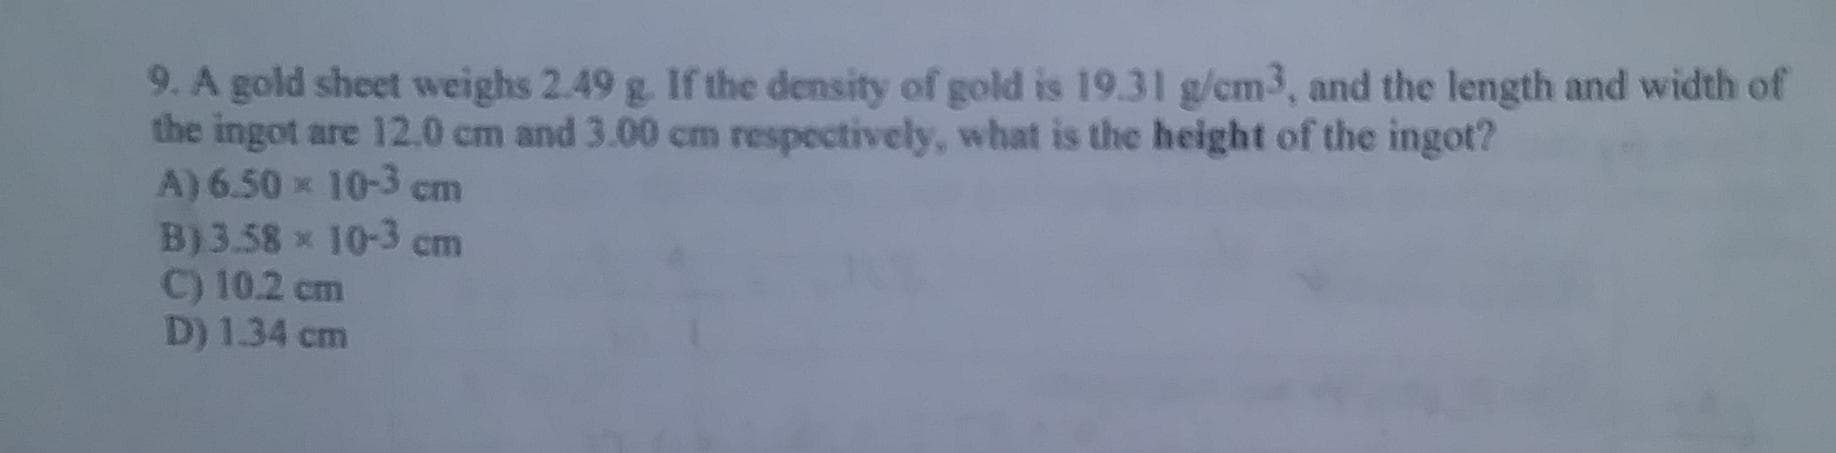 9. A gold sheet weighs 2.49 g. If the density of gold is 19.31 g/cm3, and the length and width of
the ingot are 12.0 cm and 3.00 cm respectively, what is the height of the ingot?
A) 6.50 x 10-3 cm
B)3.58 x 10-3 cm
C) 10.2 cm
D) 1.34 cm
